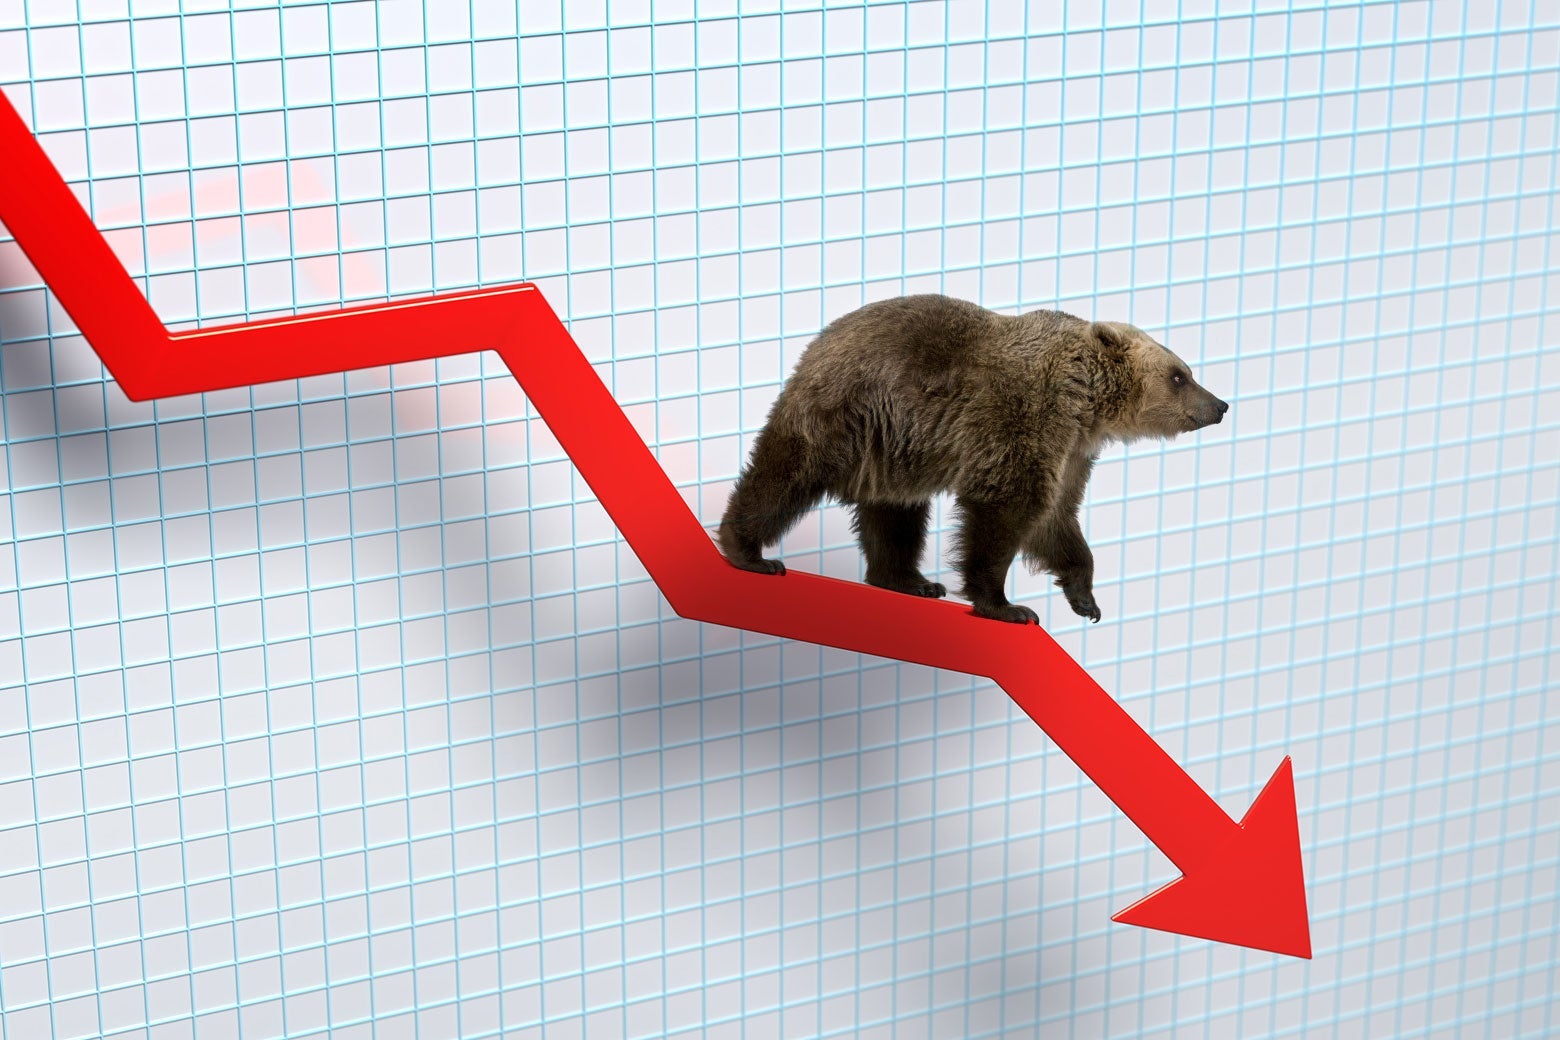 A bear walks on a red, downward-sloping arrow on a stock chart.